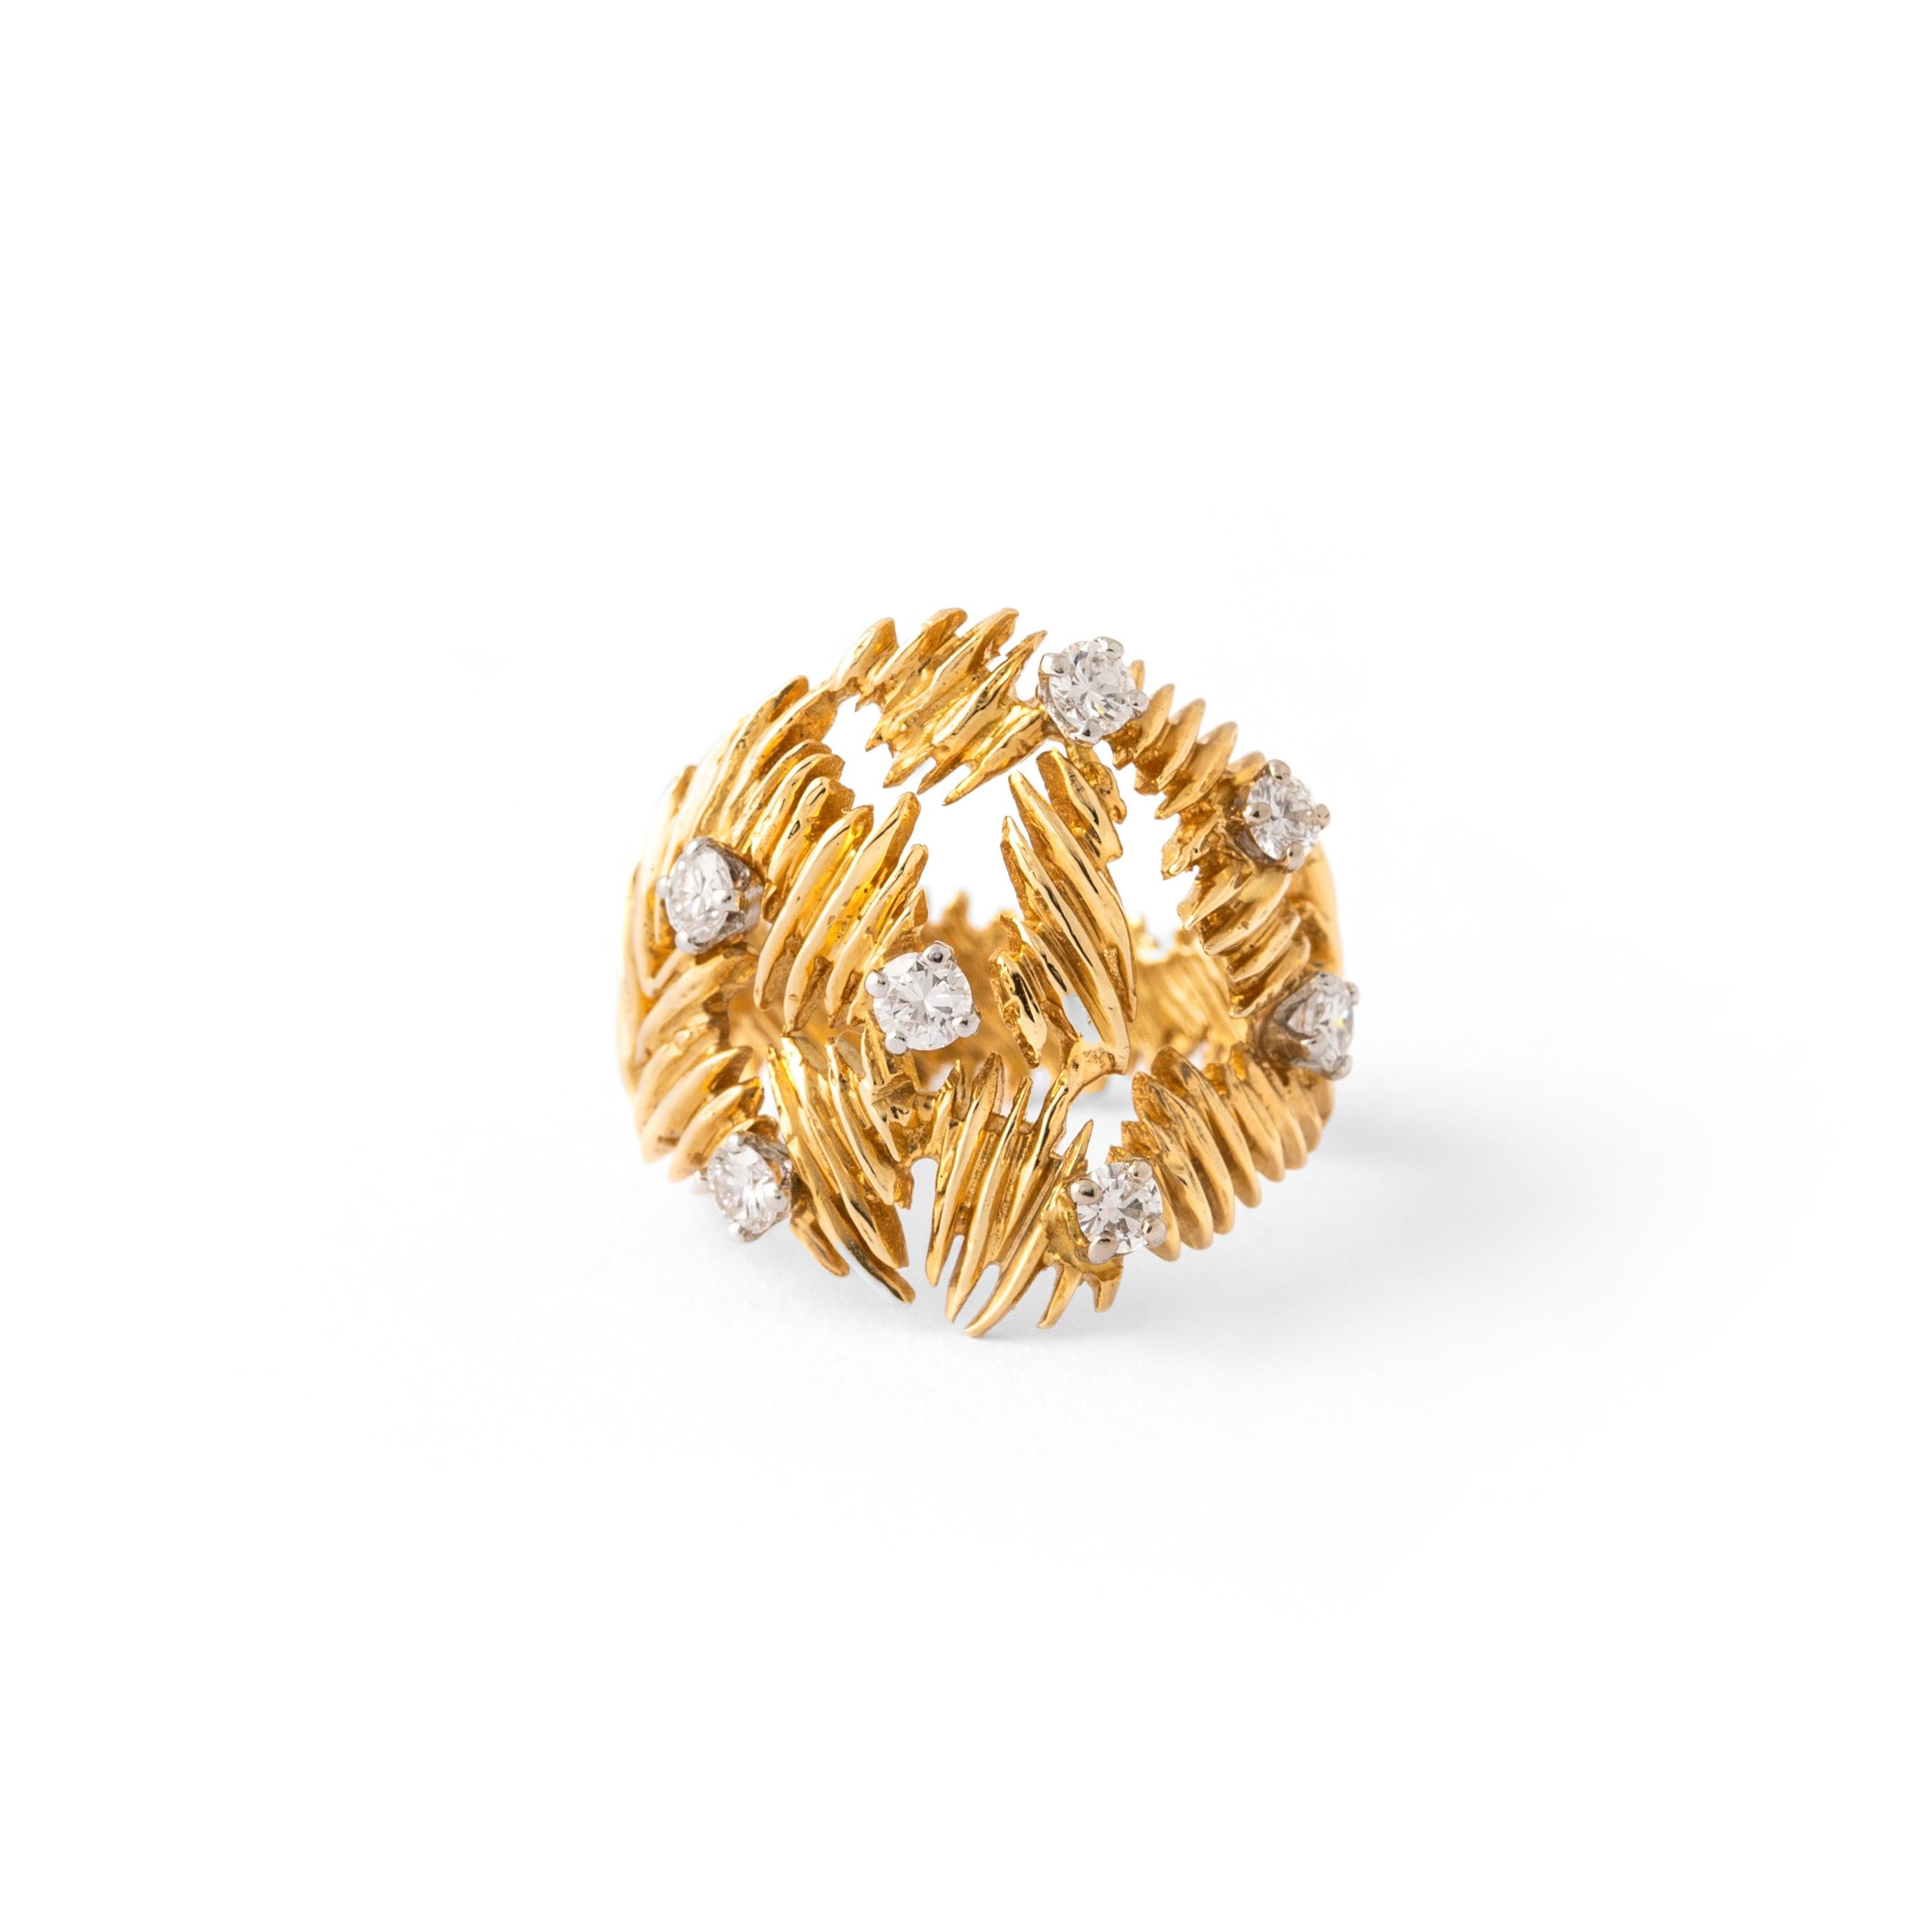 Introducing the exquisite Gilbert Albert Diamond Yellow Gold 18K Ring, a true testament to late 20th-century craftsmanship. This stunning piece features a masterfully designed 18K yellow gold band, showcasing the elegance and brilliance of this